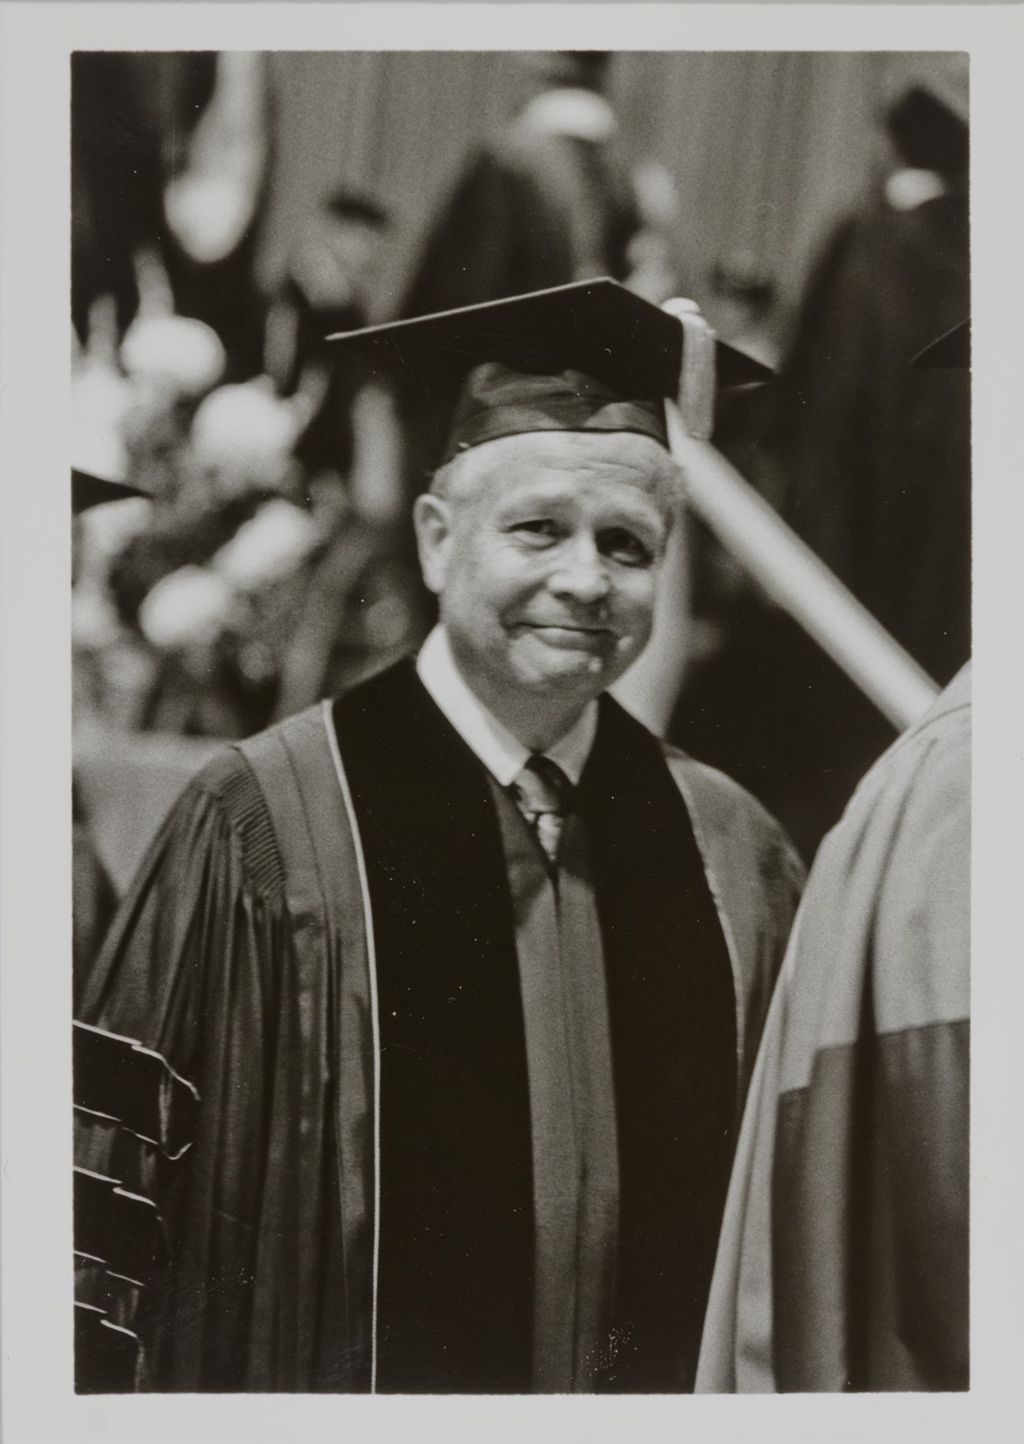 Miniature of University of Illinois Board of Trustees member Dean Matter at the graduation ceremony